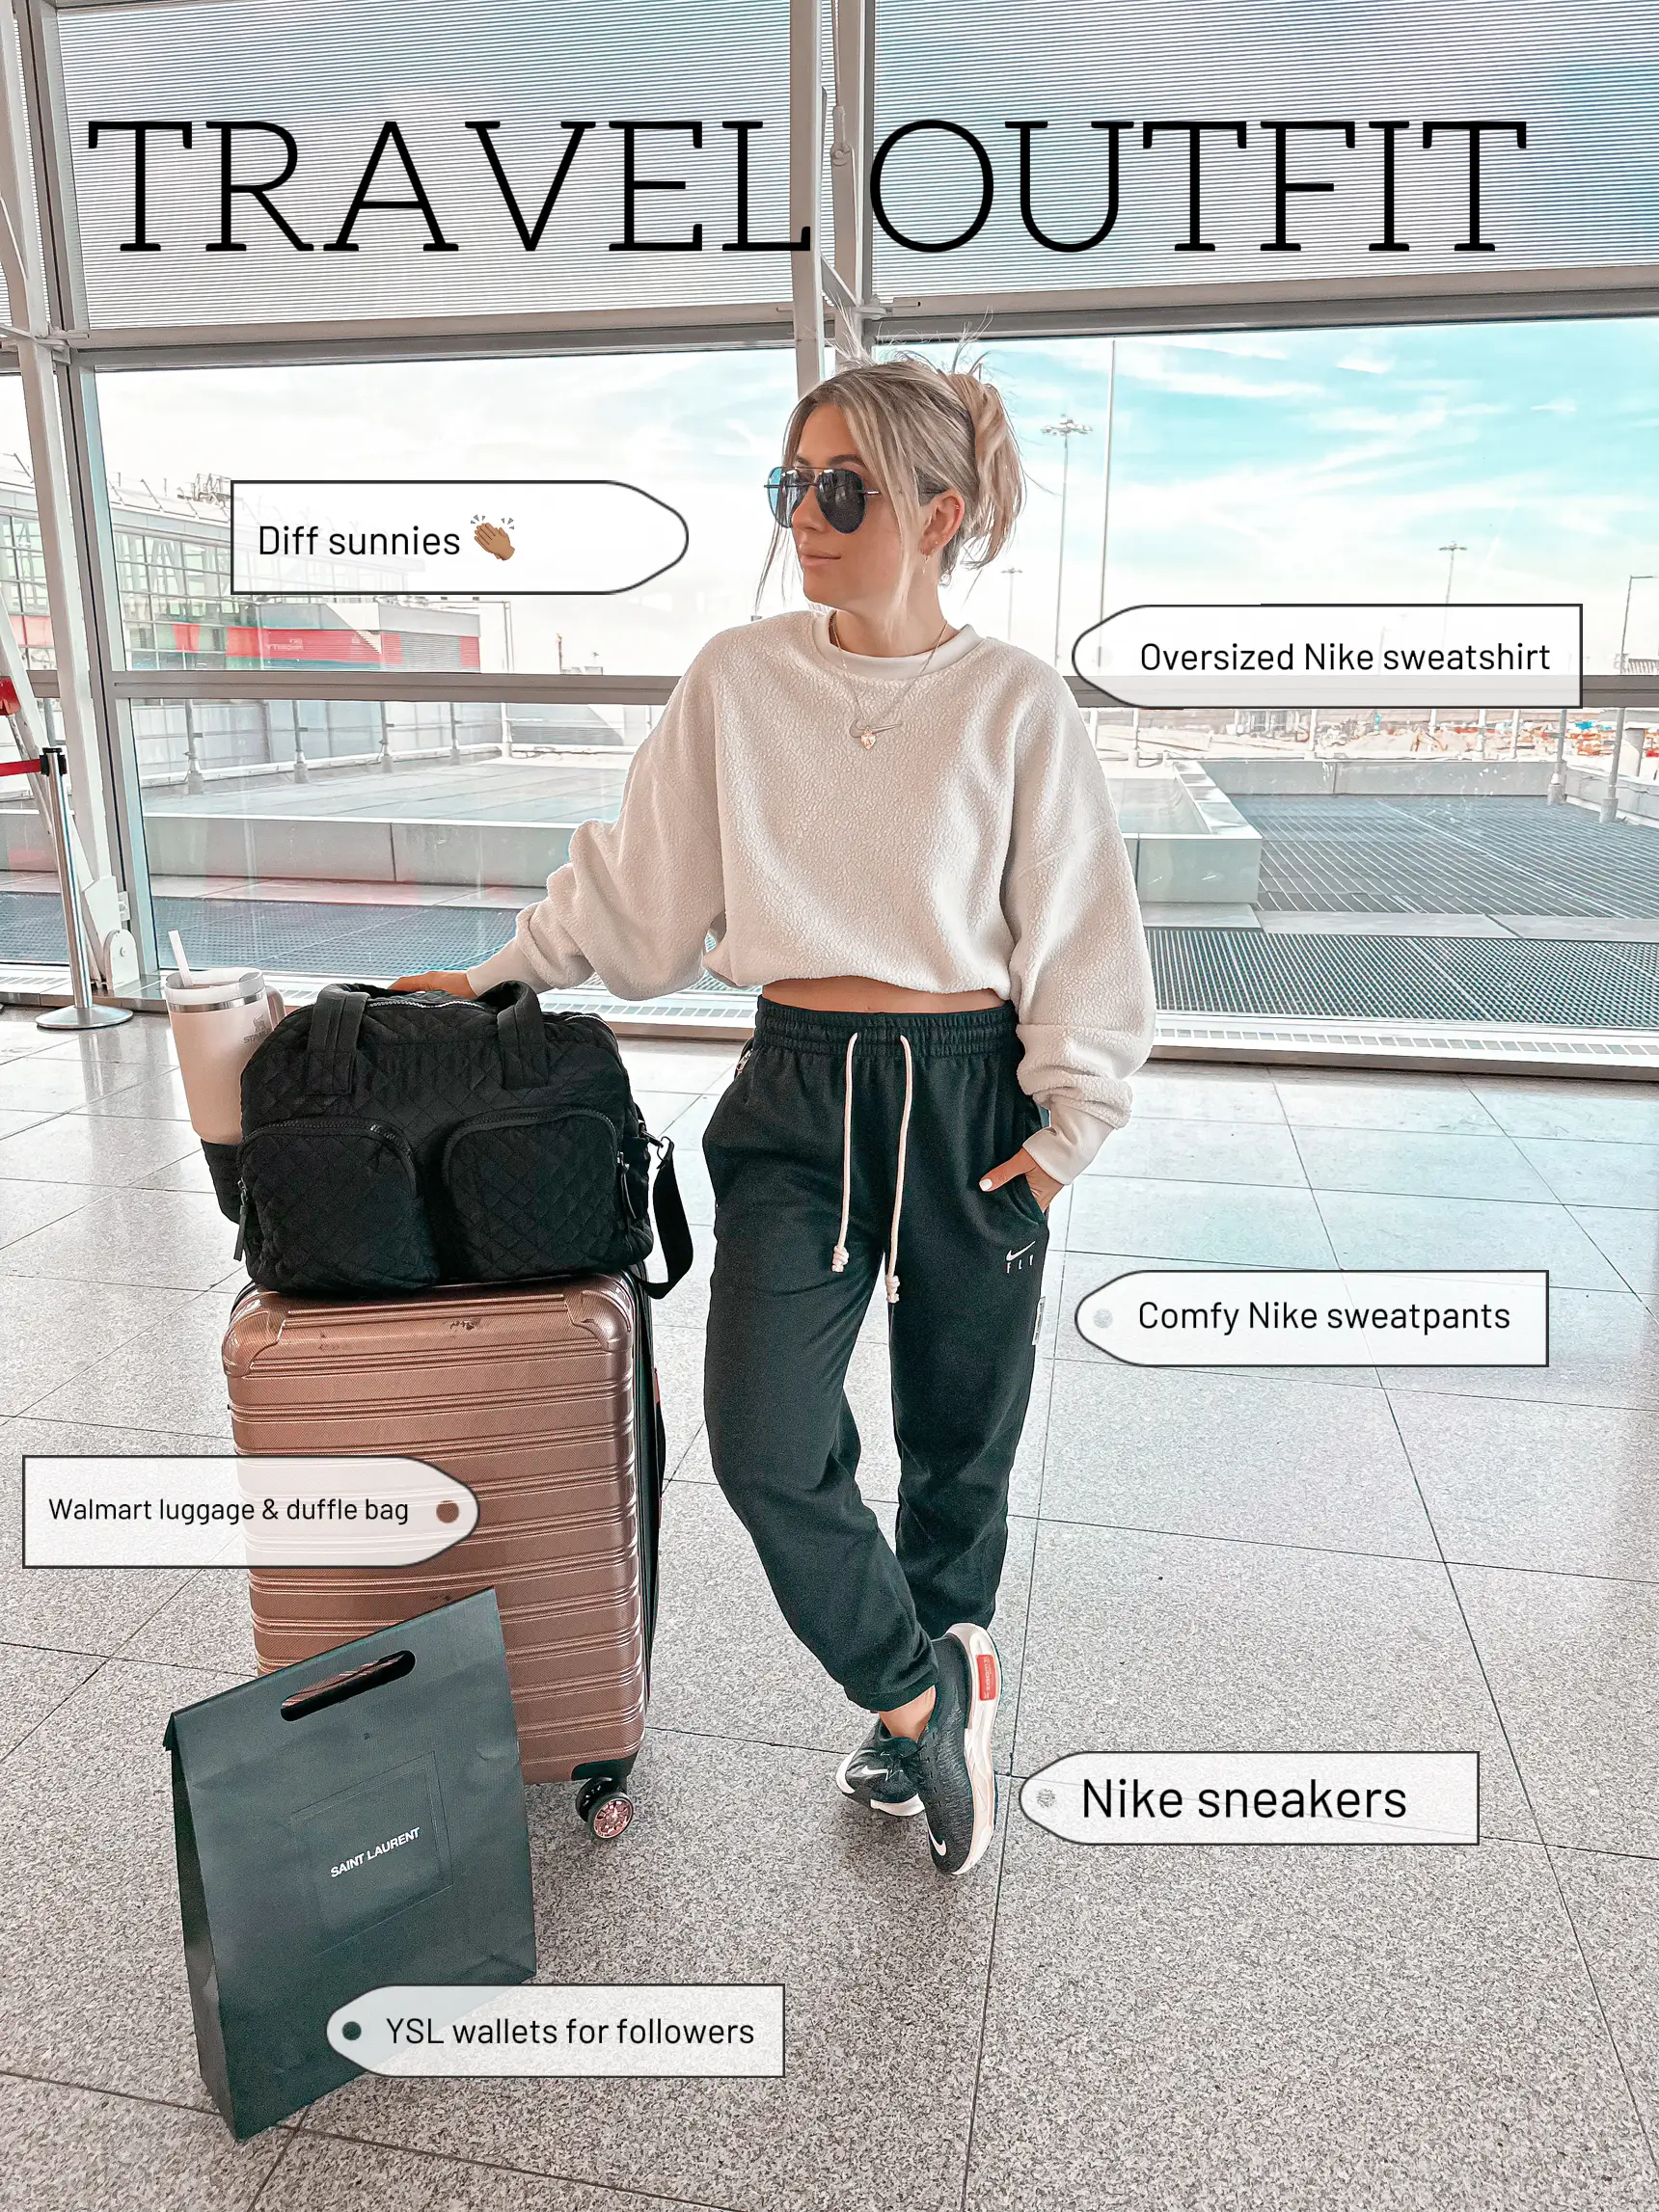 Today's comfy travel outfit, Gallery posted by Laura Beverlin